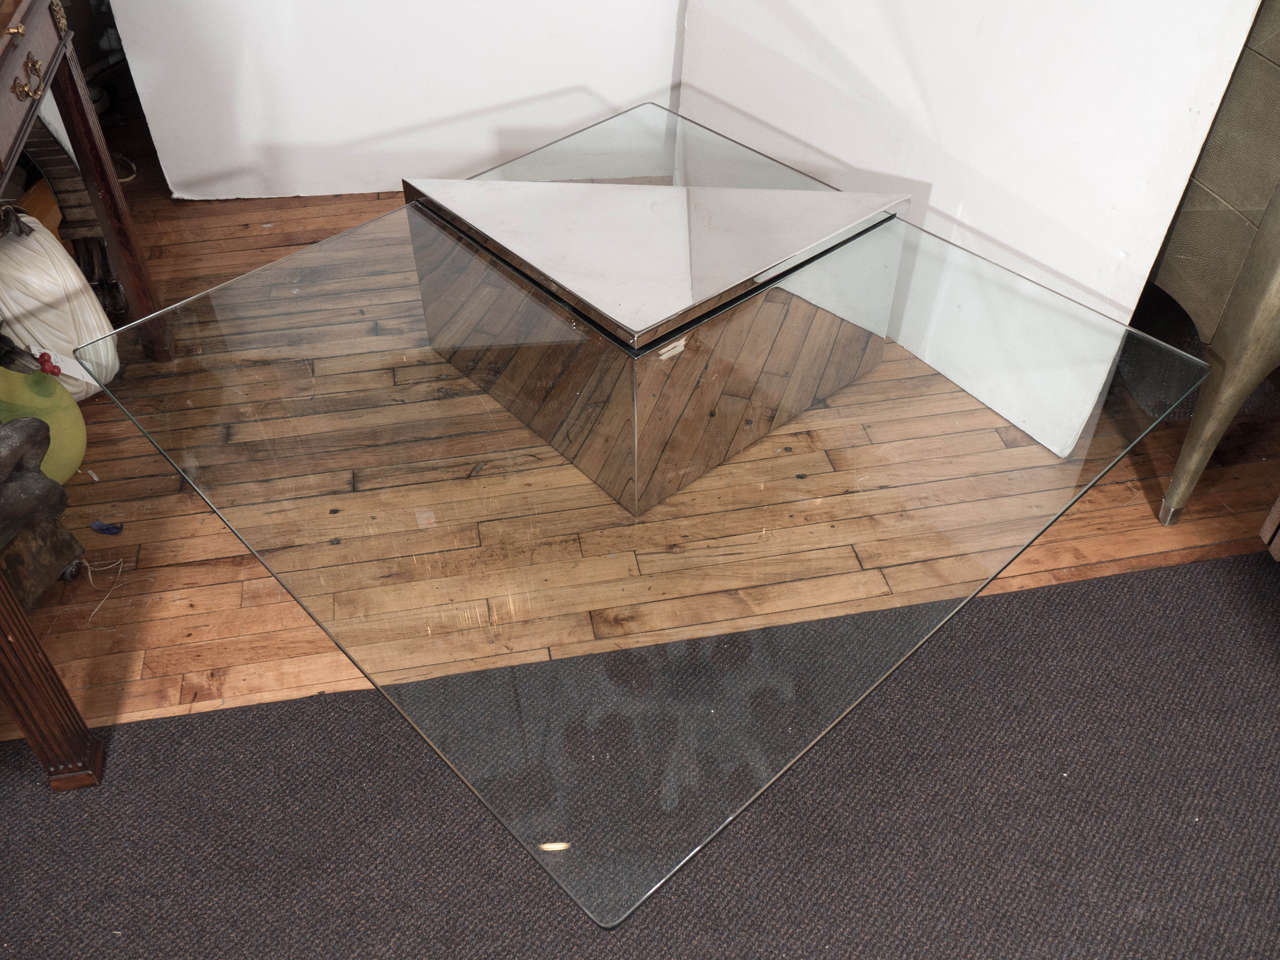 Mid-Century Modern Midcentury Rectangular Cantilevered Glass Coffee or Cocktail Table by Brueton